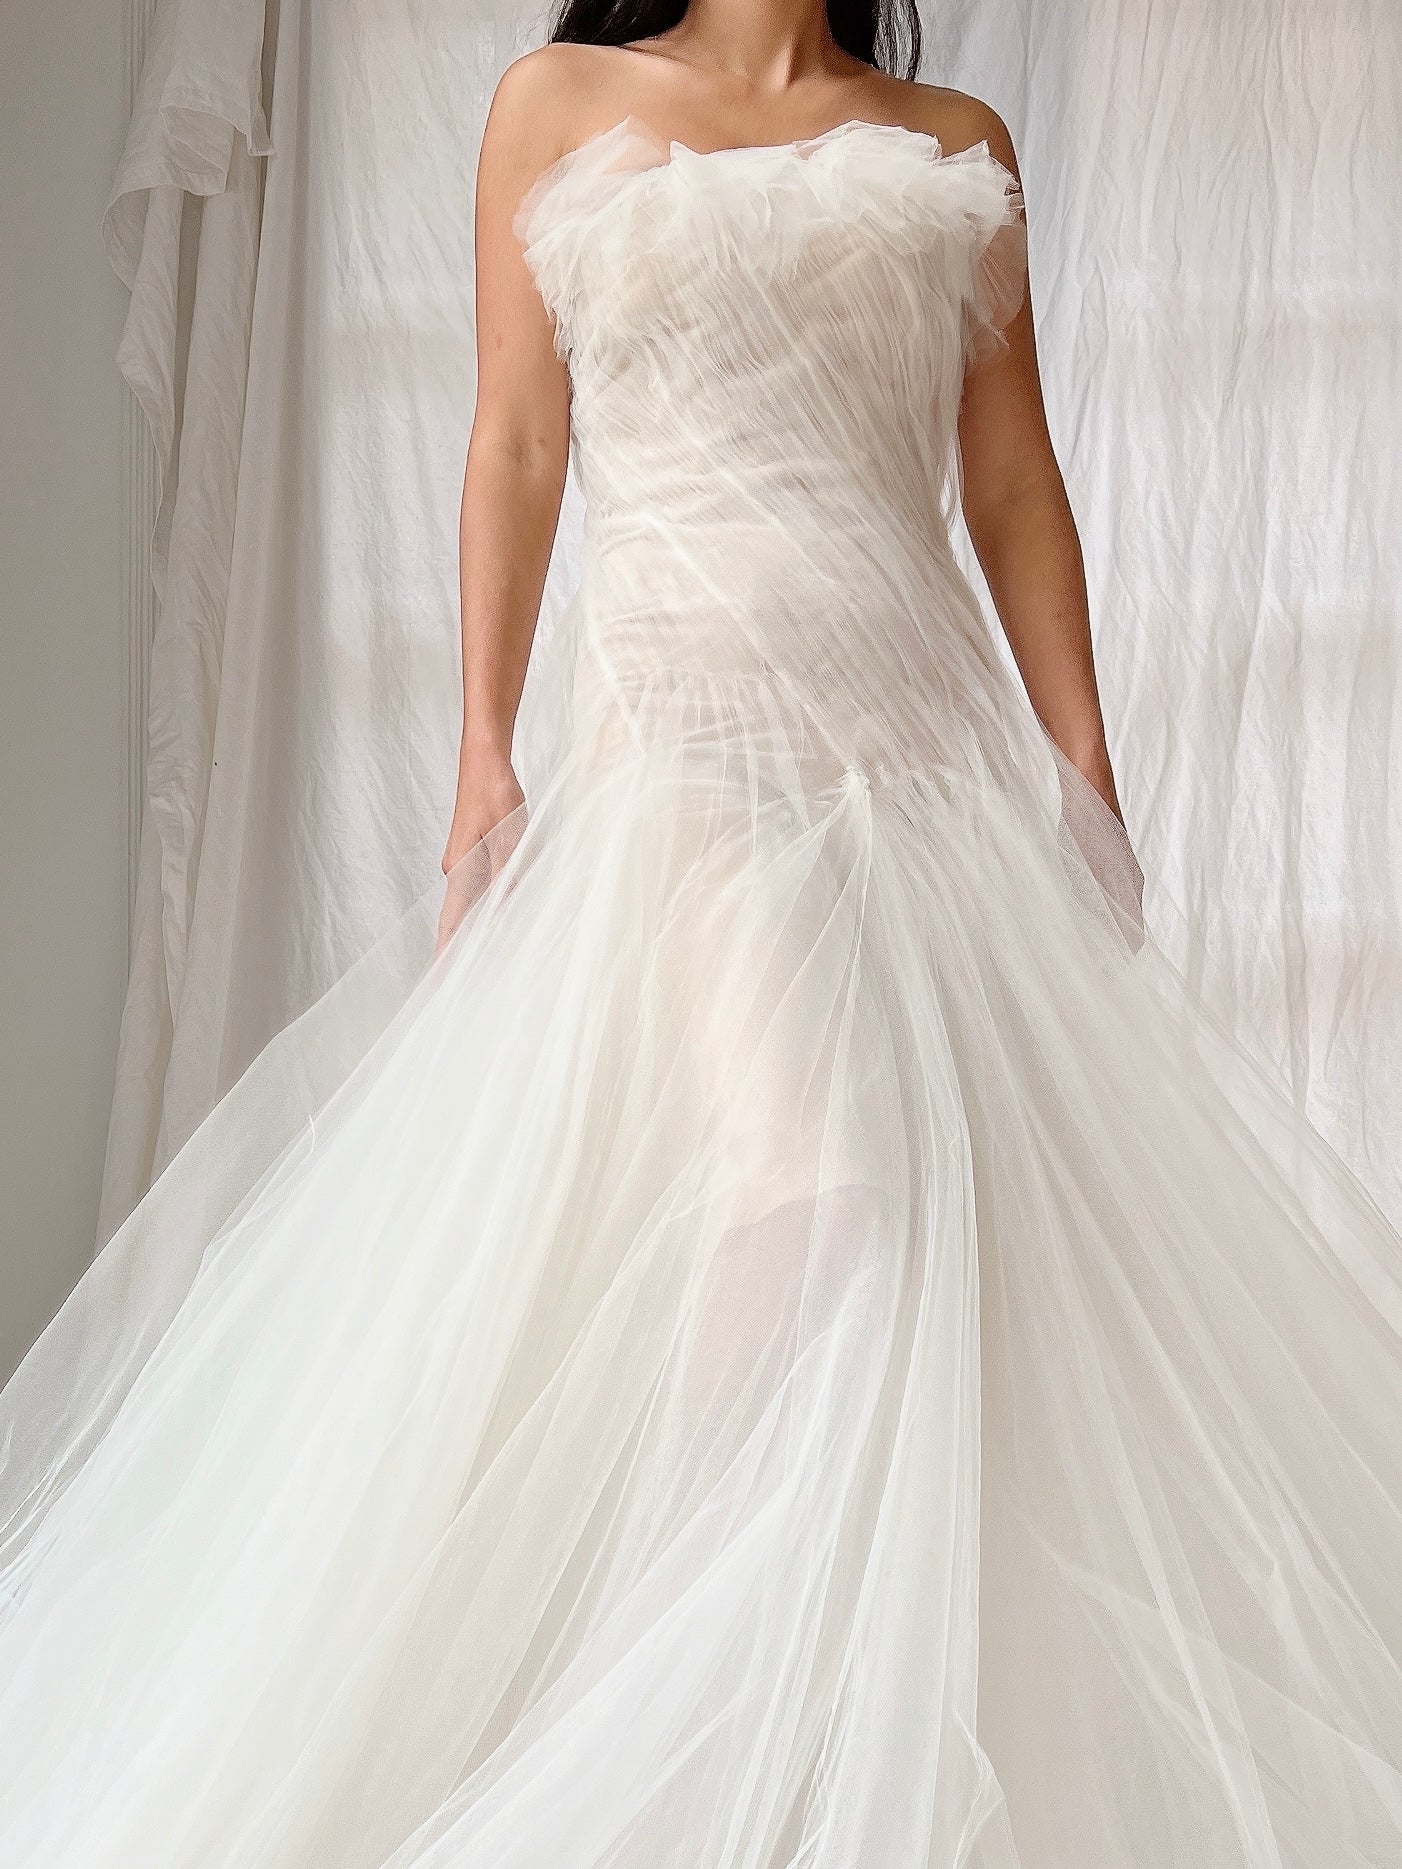 Vera Wang Tulle Gown - XS/0/2